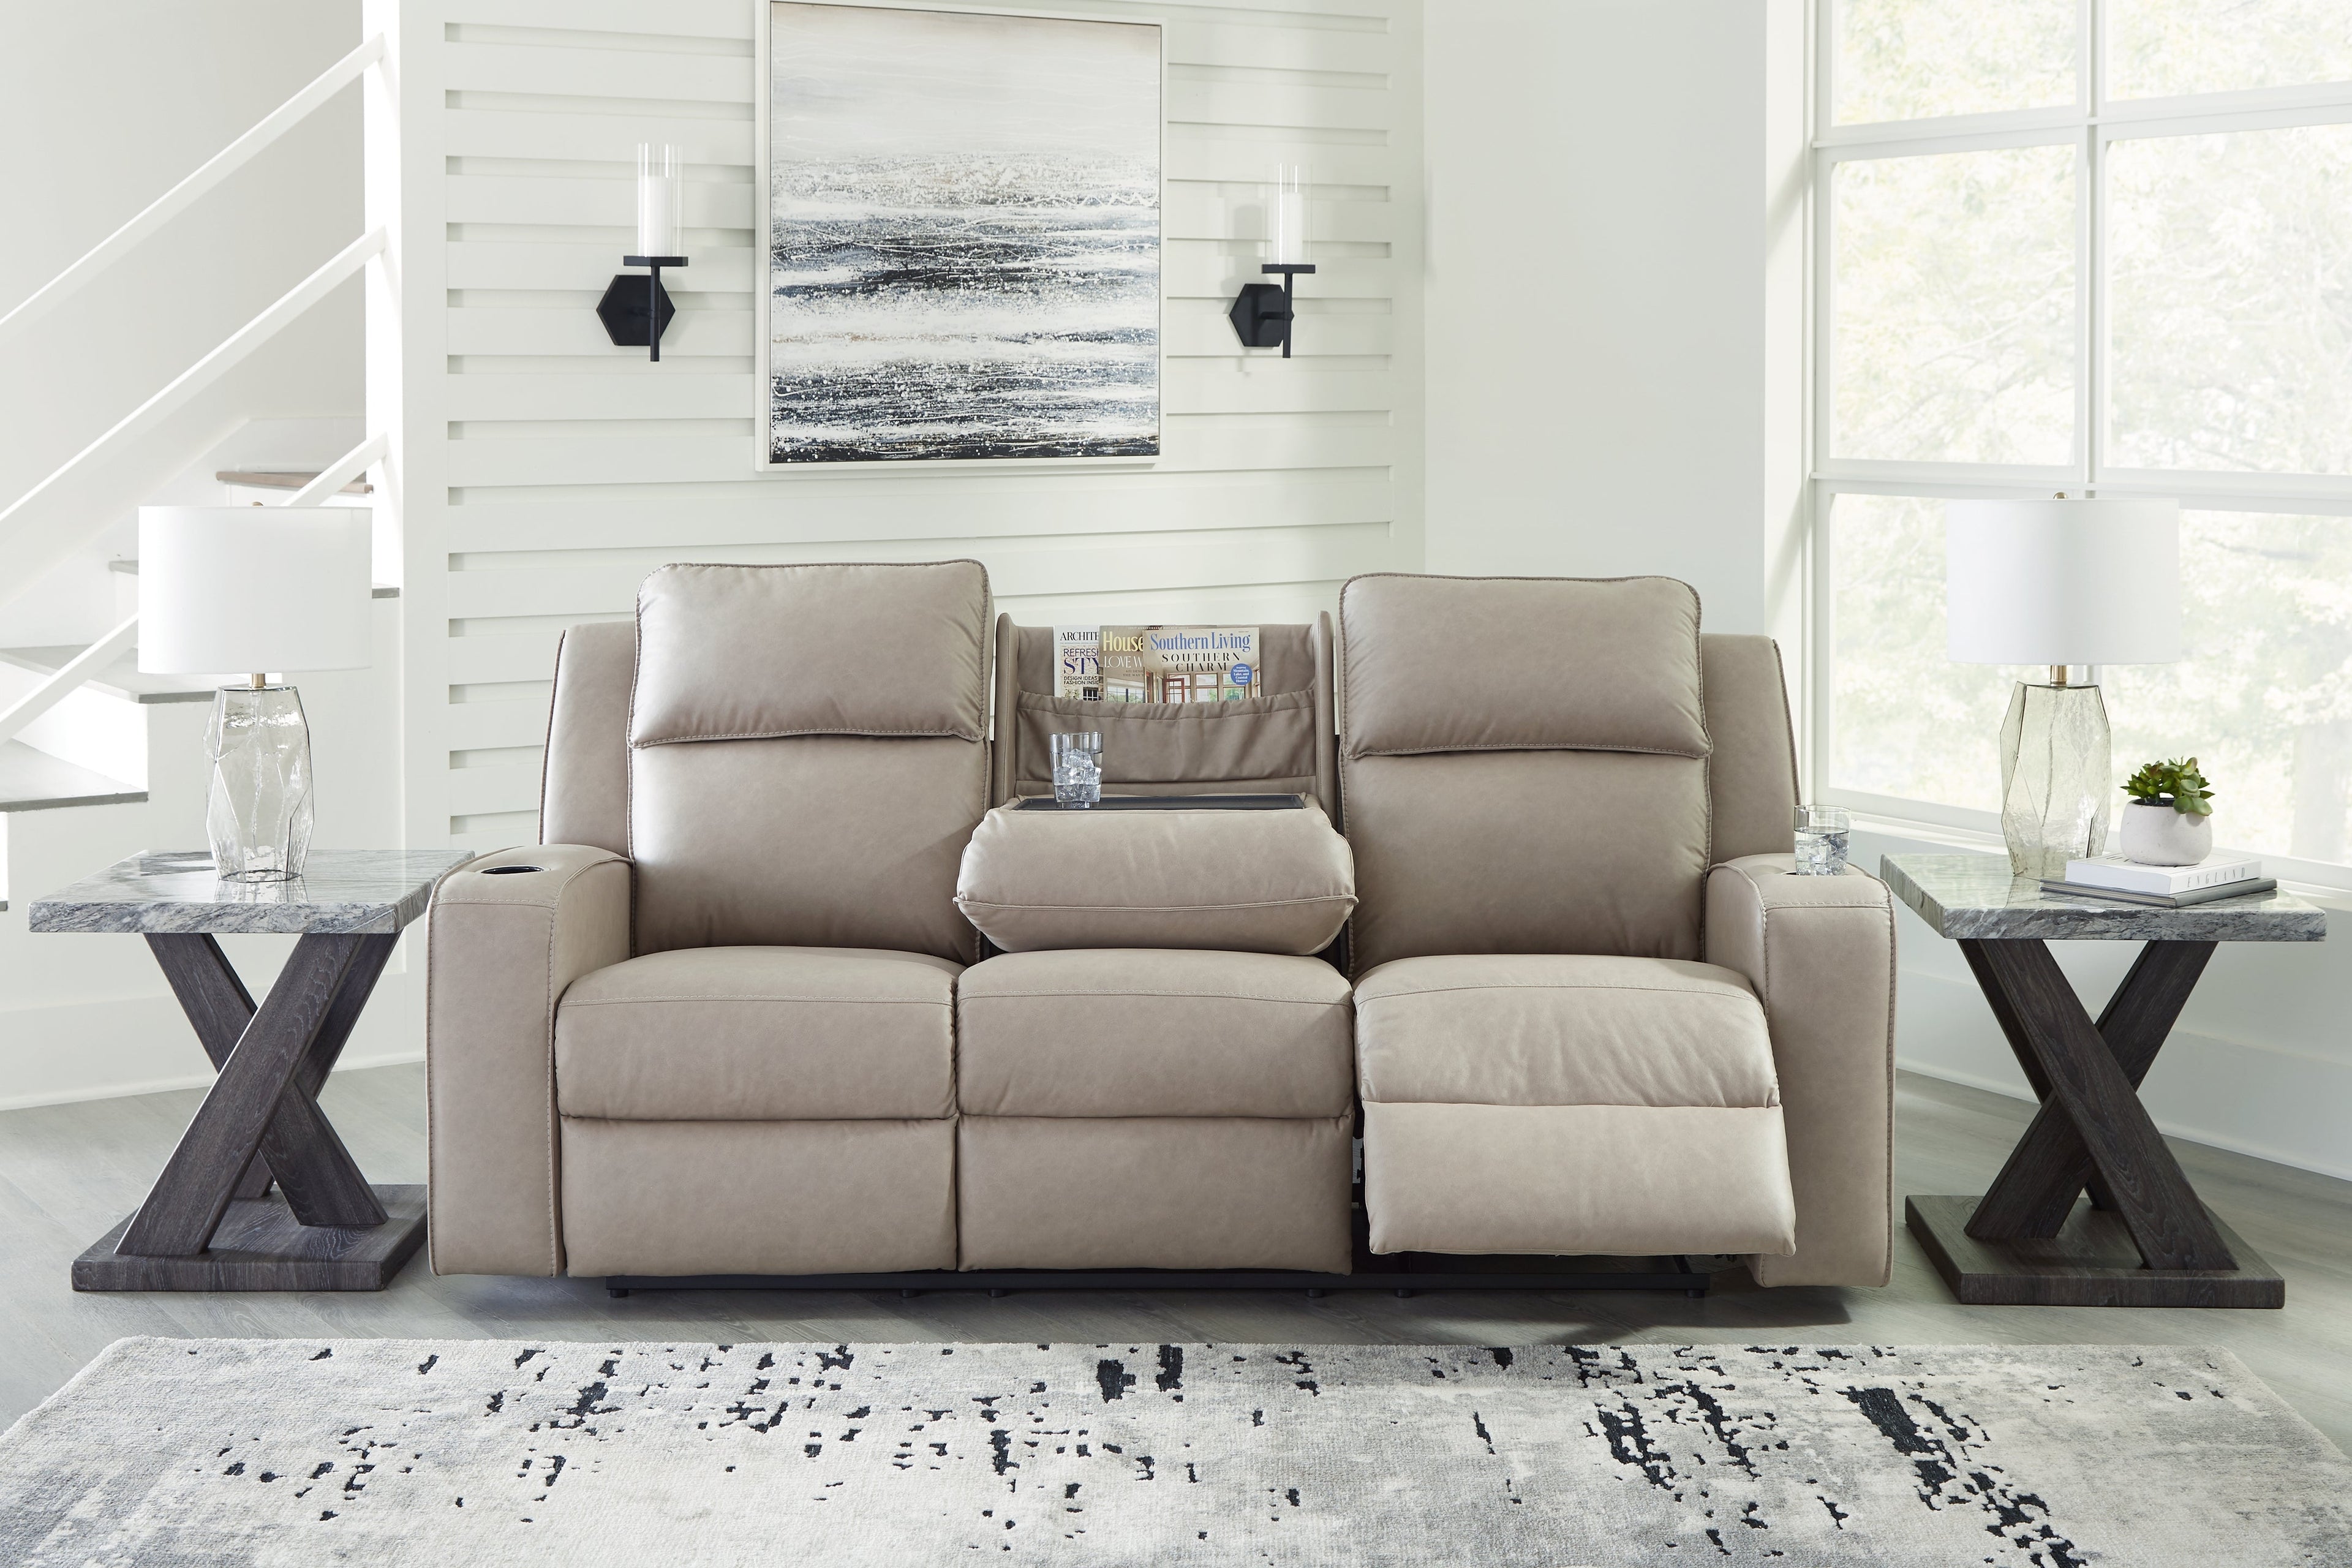 Lavenhorne Pebble Reclining Sofa with Drop Down Table - 6330789 - Bien Home Furniture &amp; Electronics